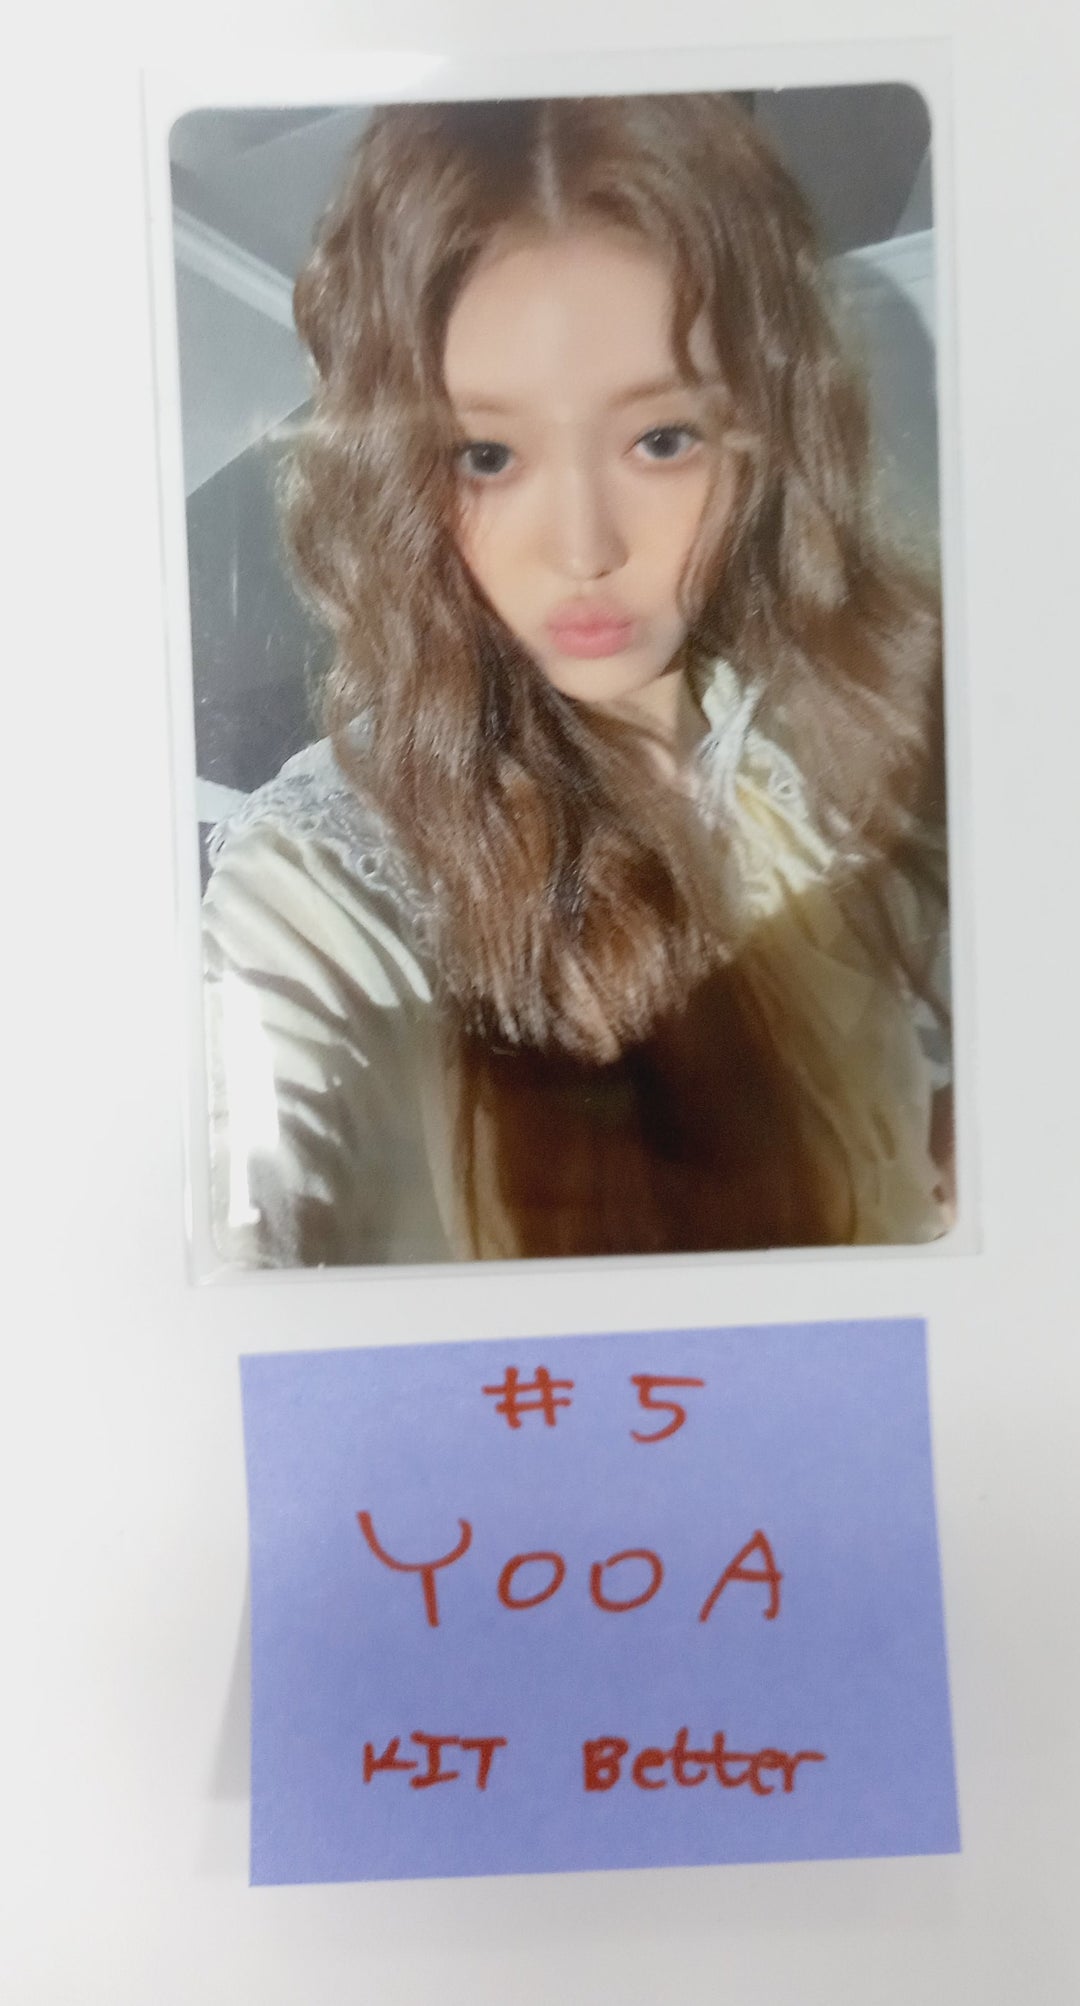 YOOA (Of Oh My Girl) "Borderline" - Kit Better Fansign Event Photocard Round 2 [Kit Ver.] [24.3.29]